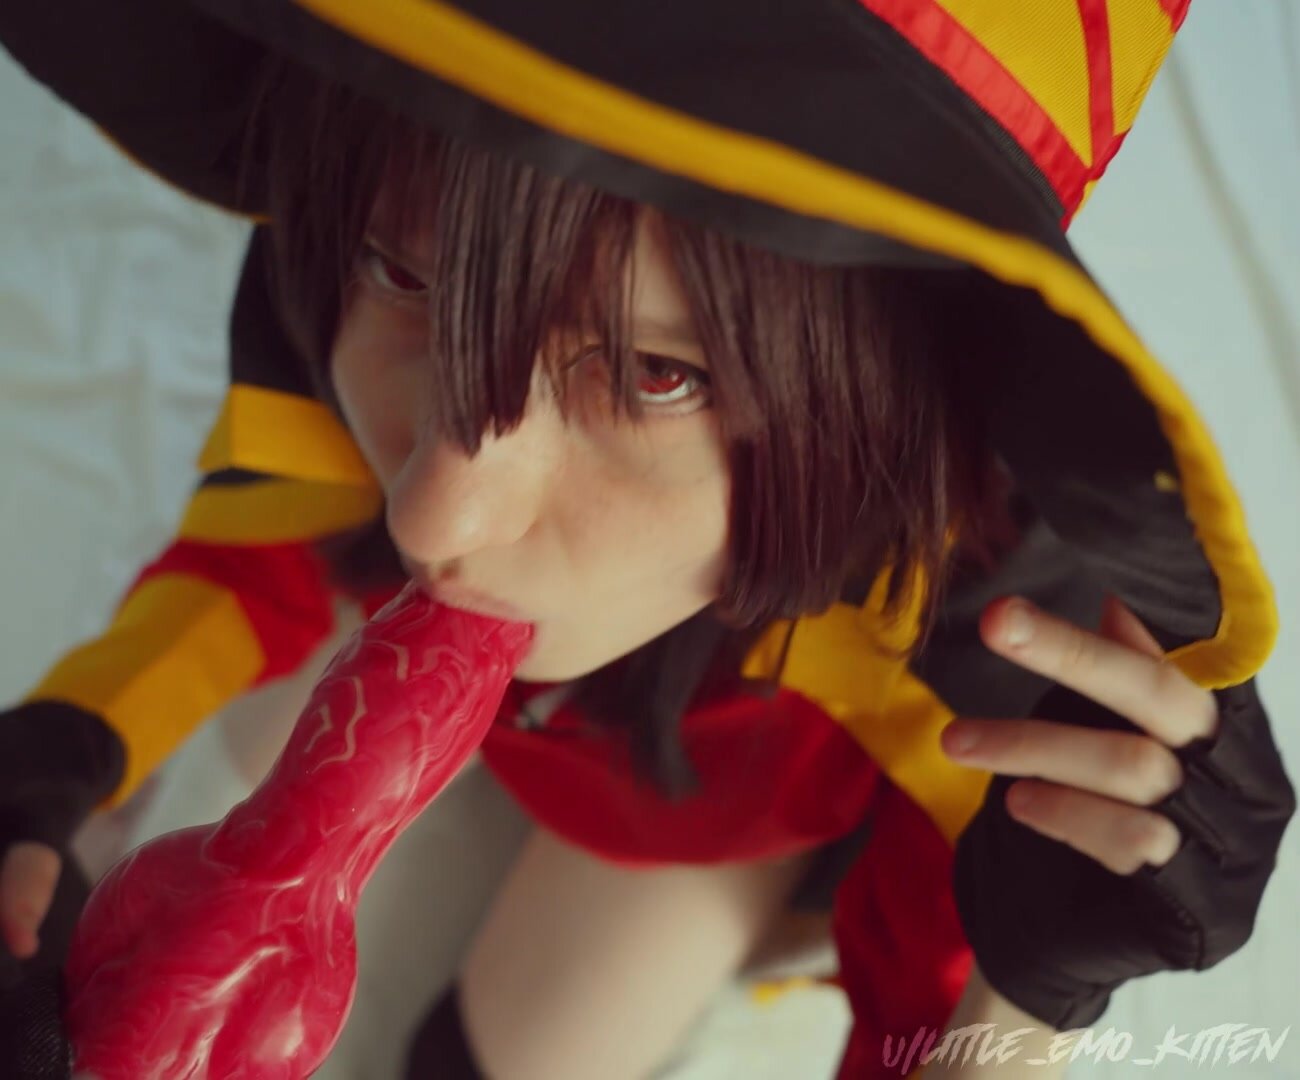 Megumin made a different kind of